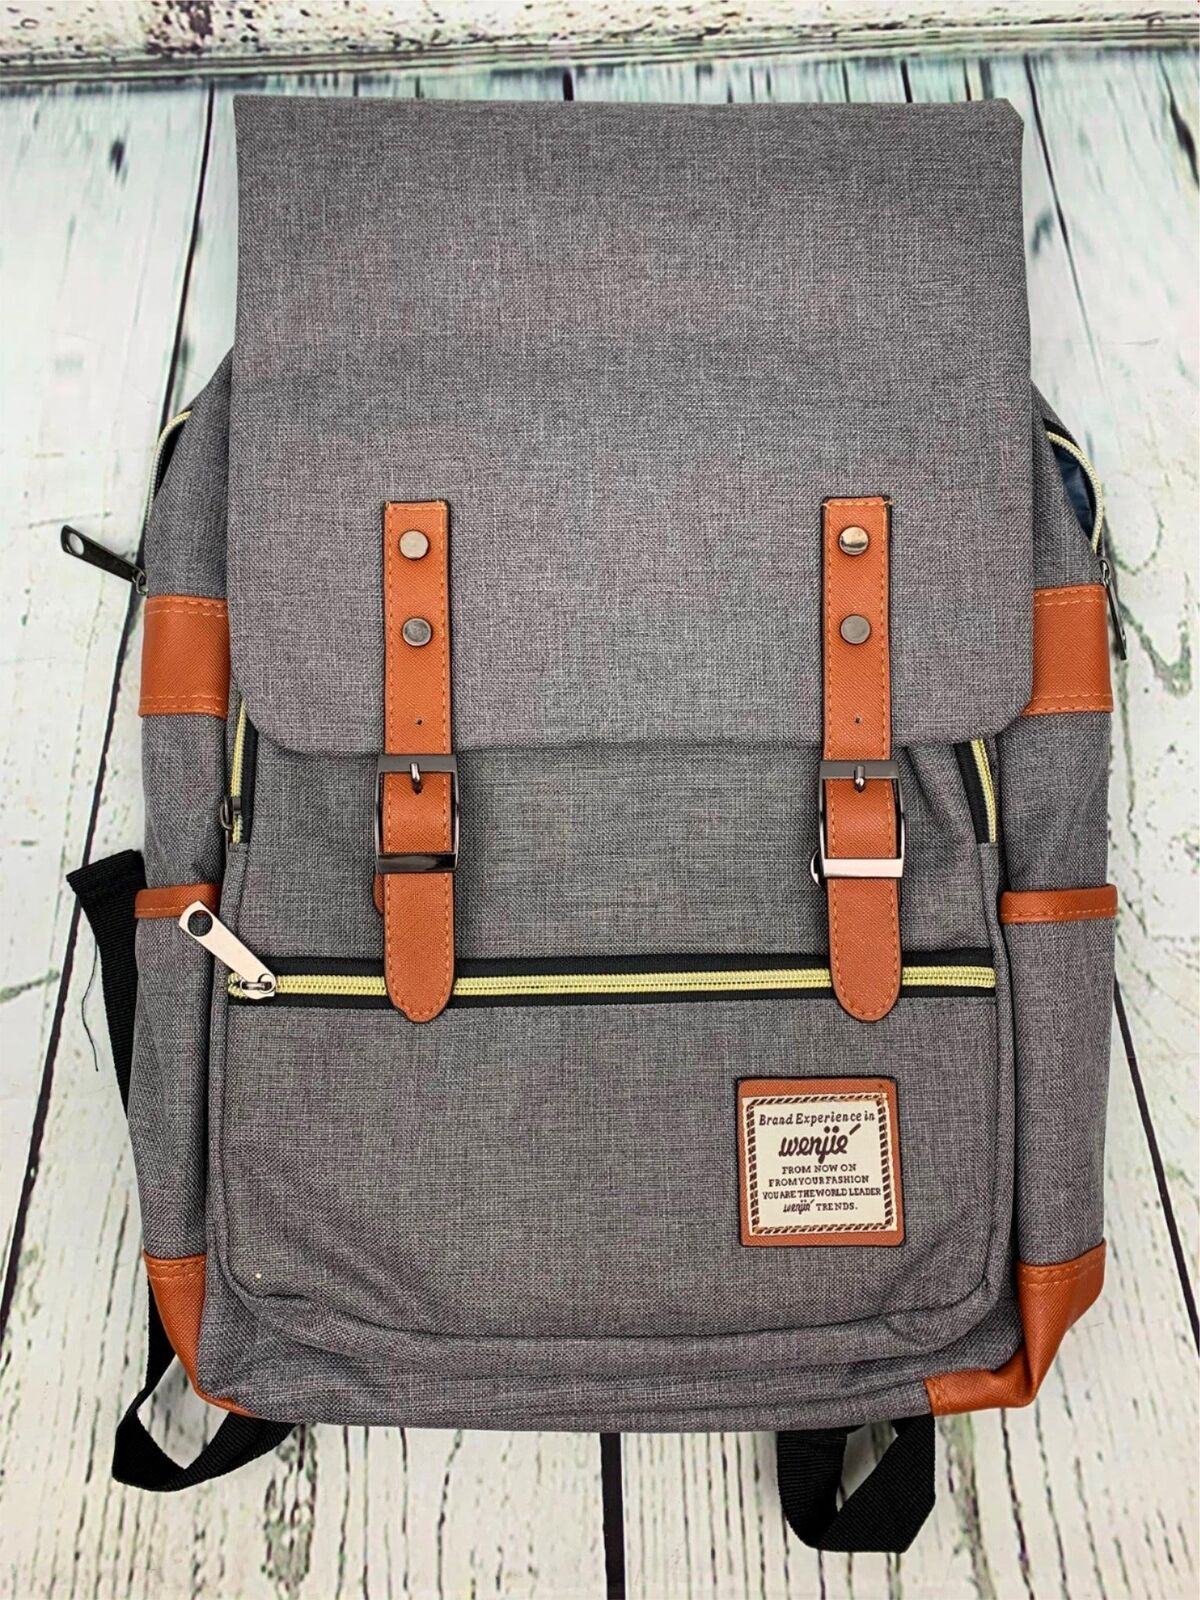 Unisex Oxford Retro Style Laptop Backpack College School Bag Student Grey Brown